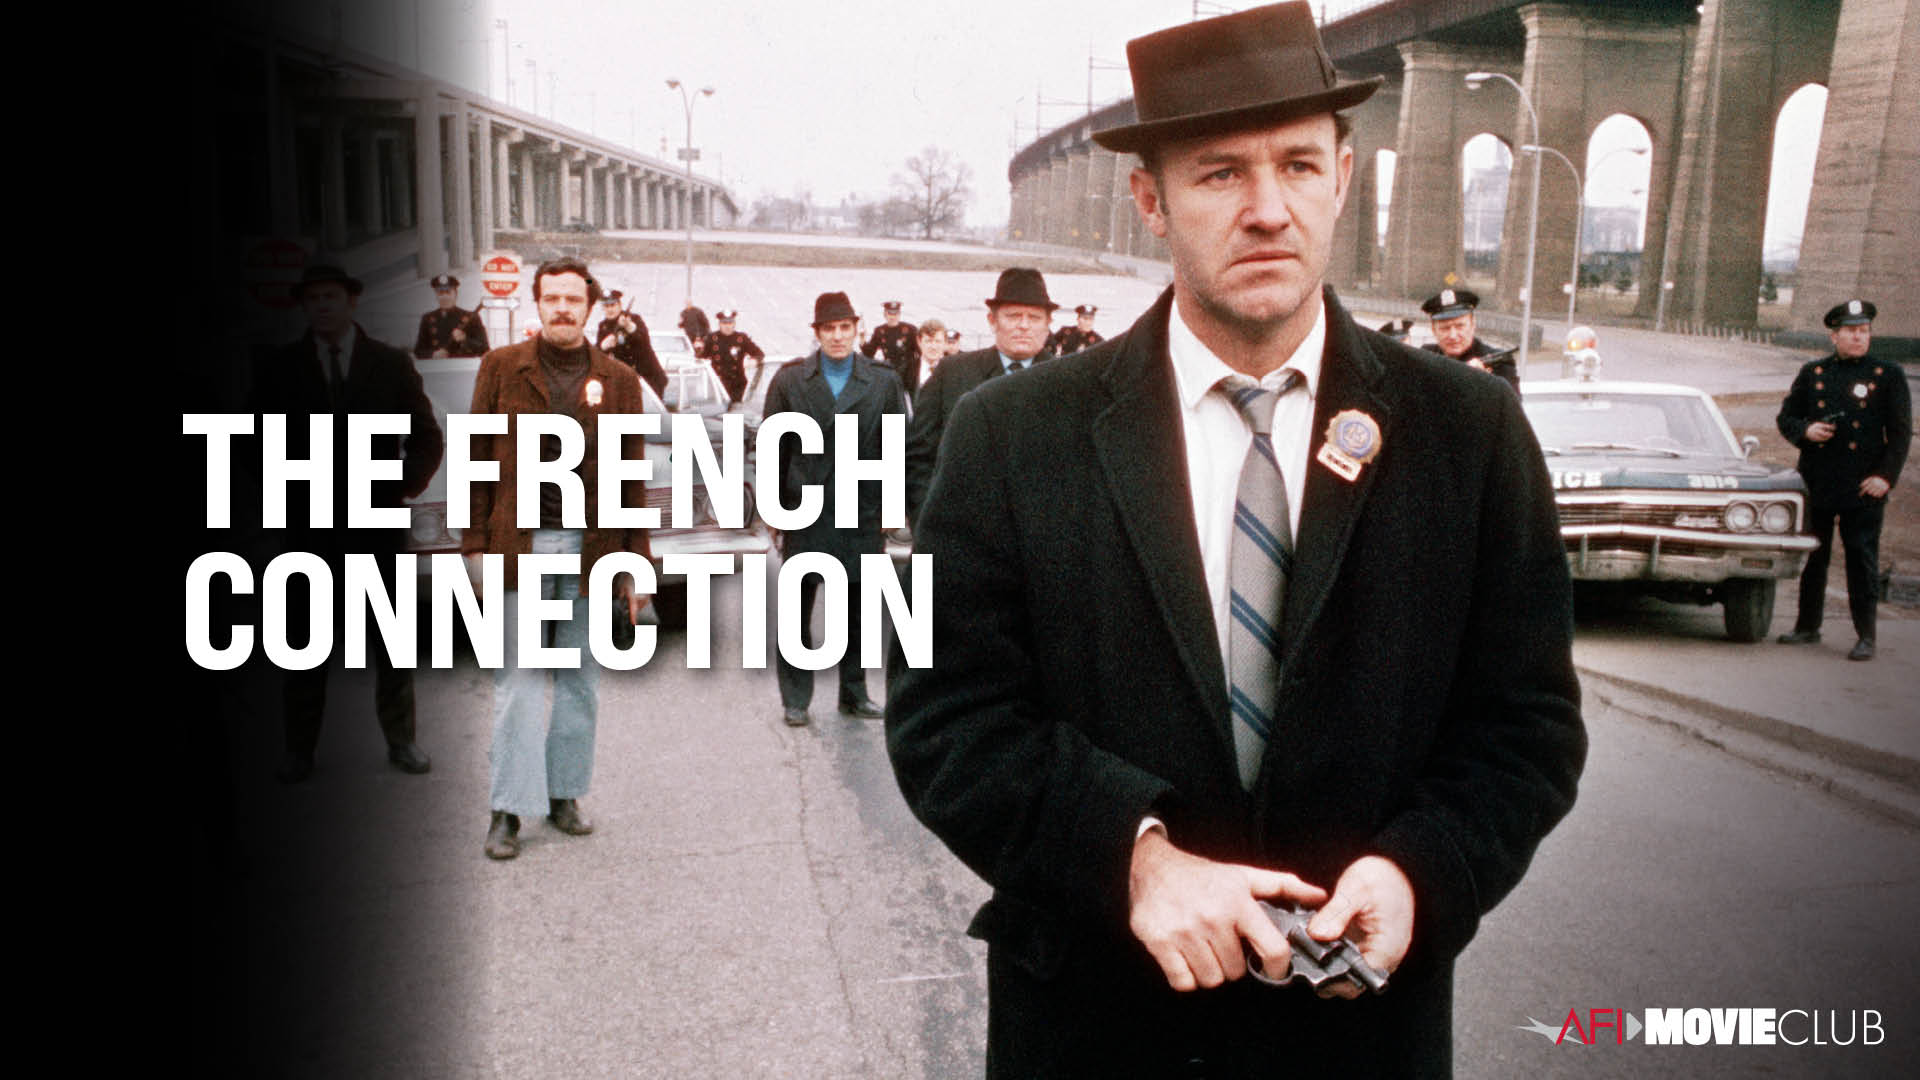 The French Connection Film Still - Gene Hackman